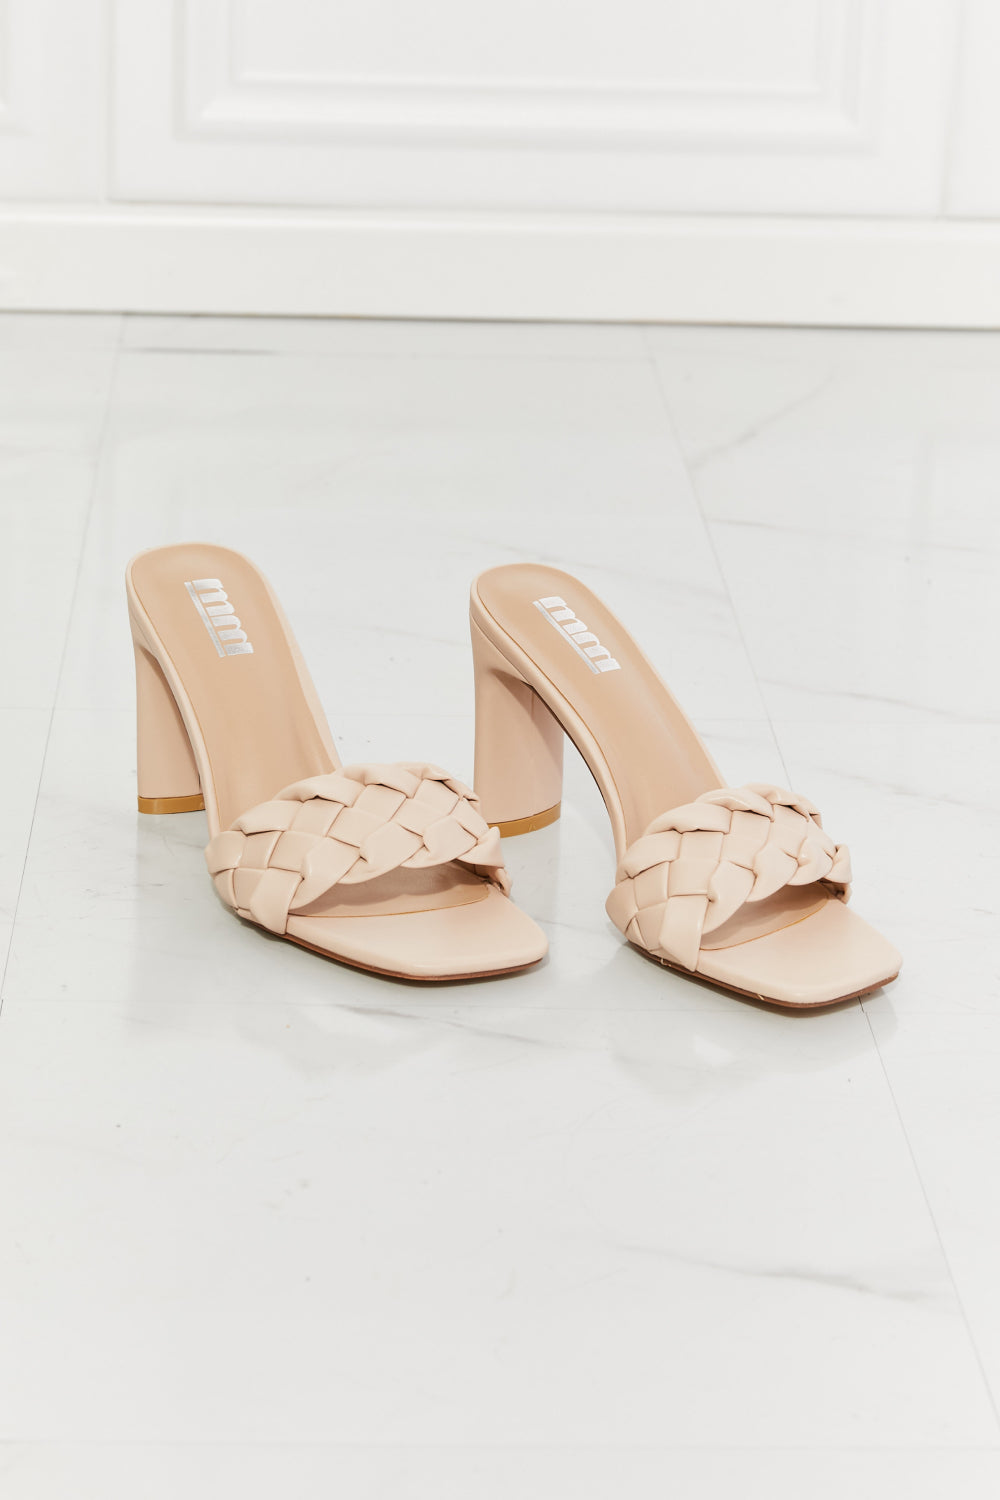 MMShoes Top of the World Braided Block Heel Sandals in Beige - BEAUTY COSMOTICS SHOP